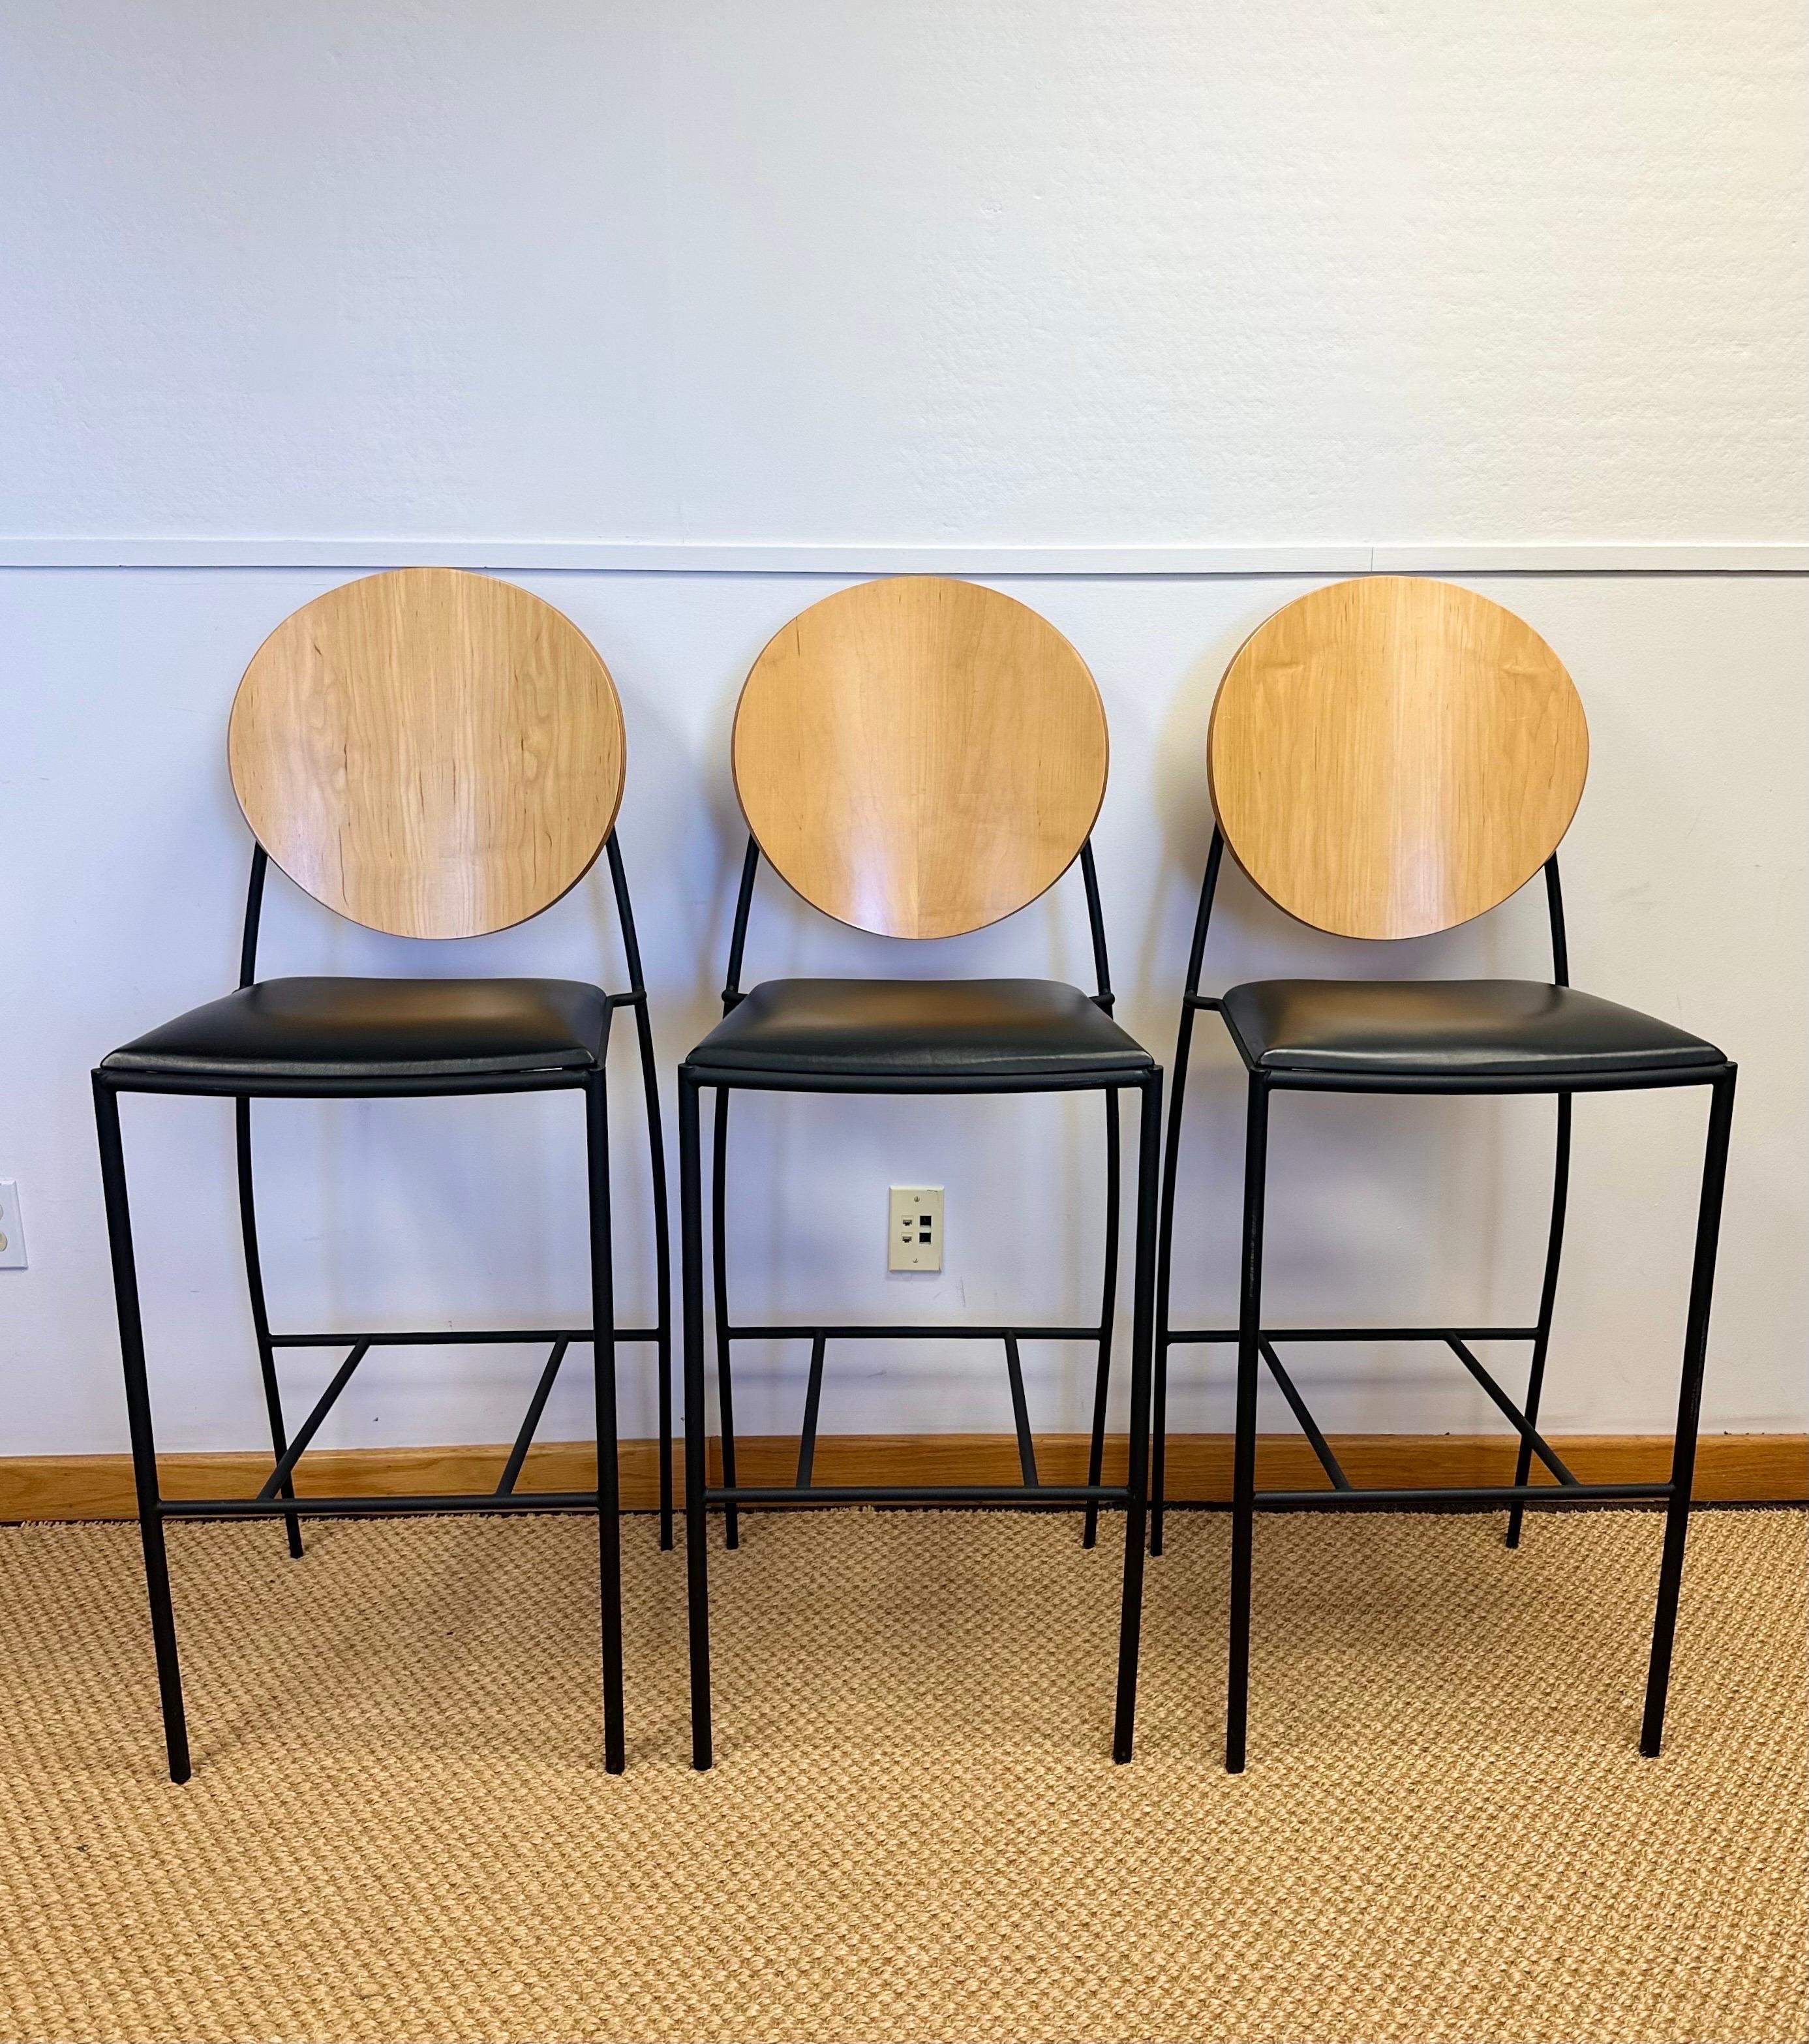 We are very pleased to offer a set of three bar counter stools by renowned American furniture designer Dakota Jackson, circa the 1990s. He began his career in the 1960s and gained recognition for his unique approach to furniture design, blending